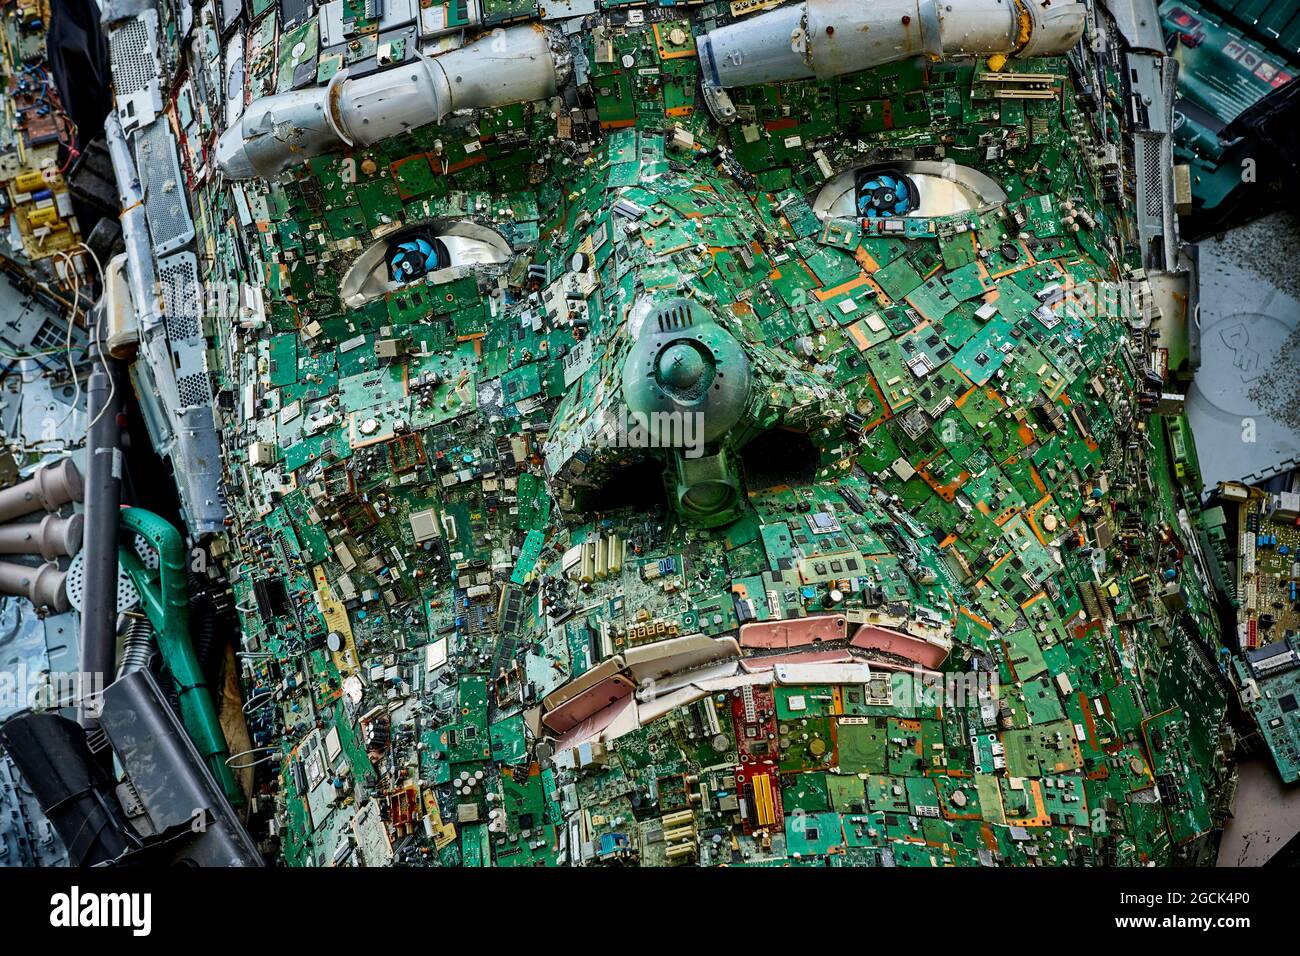 Stockport MusicMagpie giant Mount Rushmore style sculpture G7 leaders head's made entirely of discarded electronics American President Joe Biden Stock Photo